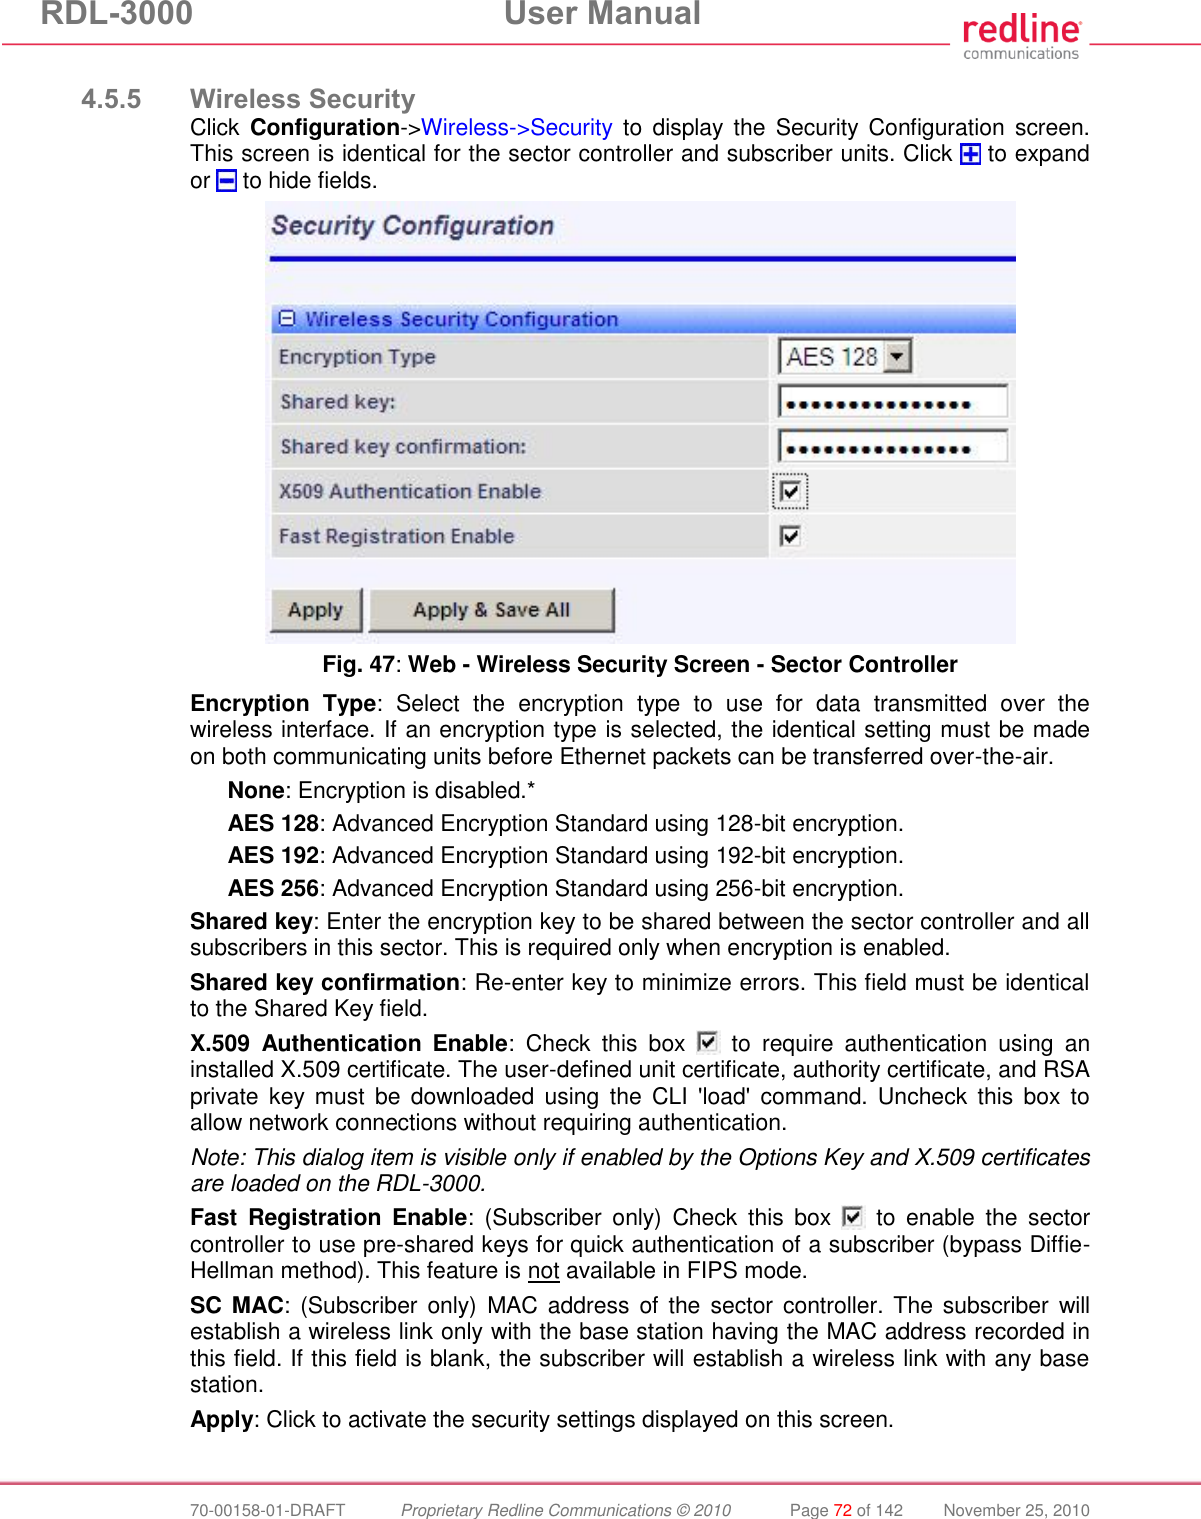 RDL-3000  User Manual  70-00158-01-DRAFT  Proprietary Redline Communications © 2010  Page 72 of 142  November 25, 2010  4.5.5 Wireless Security Click  Configuration-&gt;Wireless-&gt;Security  to  display the  Security Configuration screen. This screen is identical for the sector controller and subscriber units. Click   to expand or   to hide fields.  Fig. 47: Web - Wireless Security Screen - Sector Controller Encryption  Type:  Select  the  encryption  type  to  use  for  data  transmitted  over  the wireless interface. If an encryption type is selected, the identical setting must be made on both communicating units before Ethernet packets can be transferred over-the-air. None: Encryption is disabled.* AES 128: Advanced Encryption Standard using 128-bit encryption. AES 192: Advanced Encryption Standard using 192-bit encryption. AES 256: Advanced Encryption Standard using 256-bit encryption. Shared key: Enter the encryption key to be shared between the sector controller and all subscribers in this sector. This is required only when encryption is enabled. Shared key confirmation: Re-enter key to minimize errors. This field must be identical to the Shared Key field. X.509  Authentication  Enable:  Check  this  box    to  require  authentication  using  an installed X.509 certificate. The user-defined unit certificate, authority certificate, and RSA private  key  must  be  downloaded using  the  CLI  &apos;load&apos;  command.  Uncheck  this  box  to allow network connections without requiring authentication. Note: This dialog item is visible only if enabled by the Options Key and X.509 certificates are loaded on the RDL-3000. Fast  Registration  Enable:  (Subscriber  only)  Check  this  box    to  enable  the  sector controller to use pre-shared keys for quick authentication of a subscriber (bypass Diffie-Hellman method). This feature is not available in FIPS mode. SC MAC: (Subscriber only)  MAC address of  the sector  controller. The subscriber  will establish a wireless link only with the base station having the MAC address recorded in this field. If this field is blank, the subscriber will establish a wireless link with any base station. Apply: Click to activate the security settings displayed on this screen. 